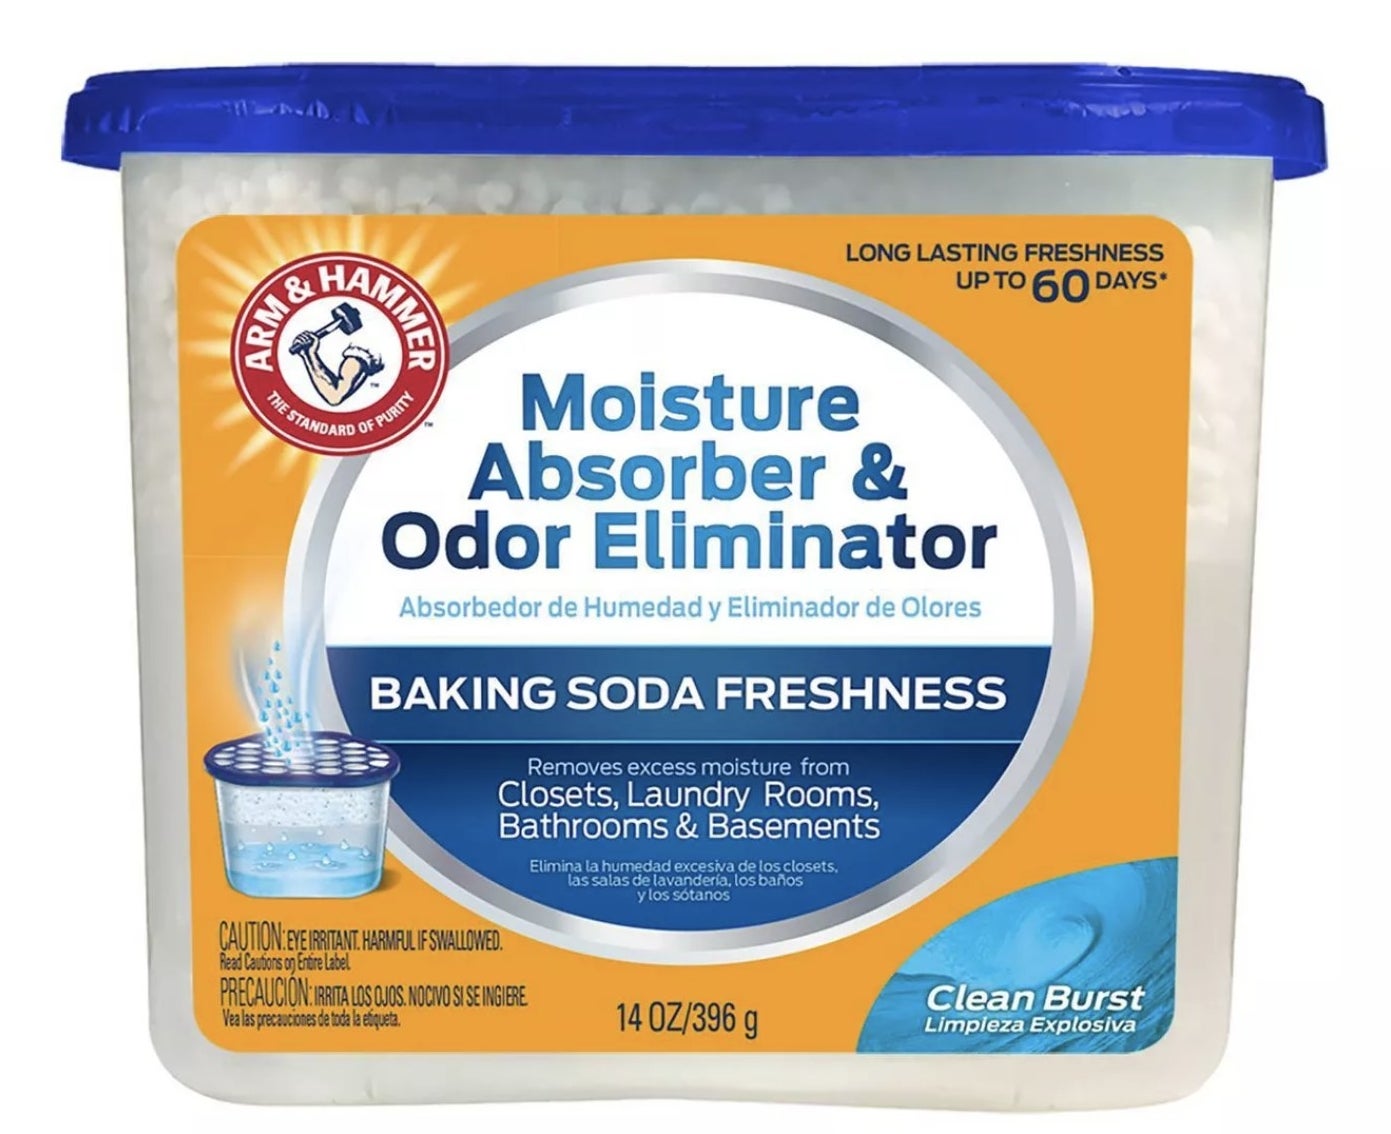 A 14-ounce container of Arm &amp;amp; Hammer Moisture Absorber &amp;amp; Odor Eliminator that removes excess moisture from closets, laundry rooms, bathrooms, and basements. It lasts for 60 days.